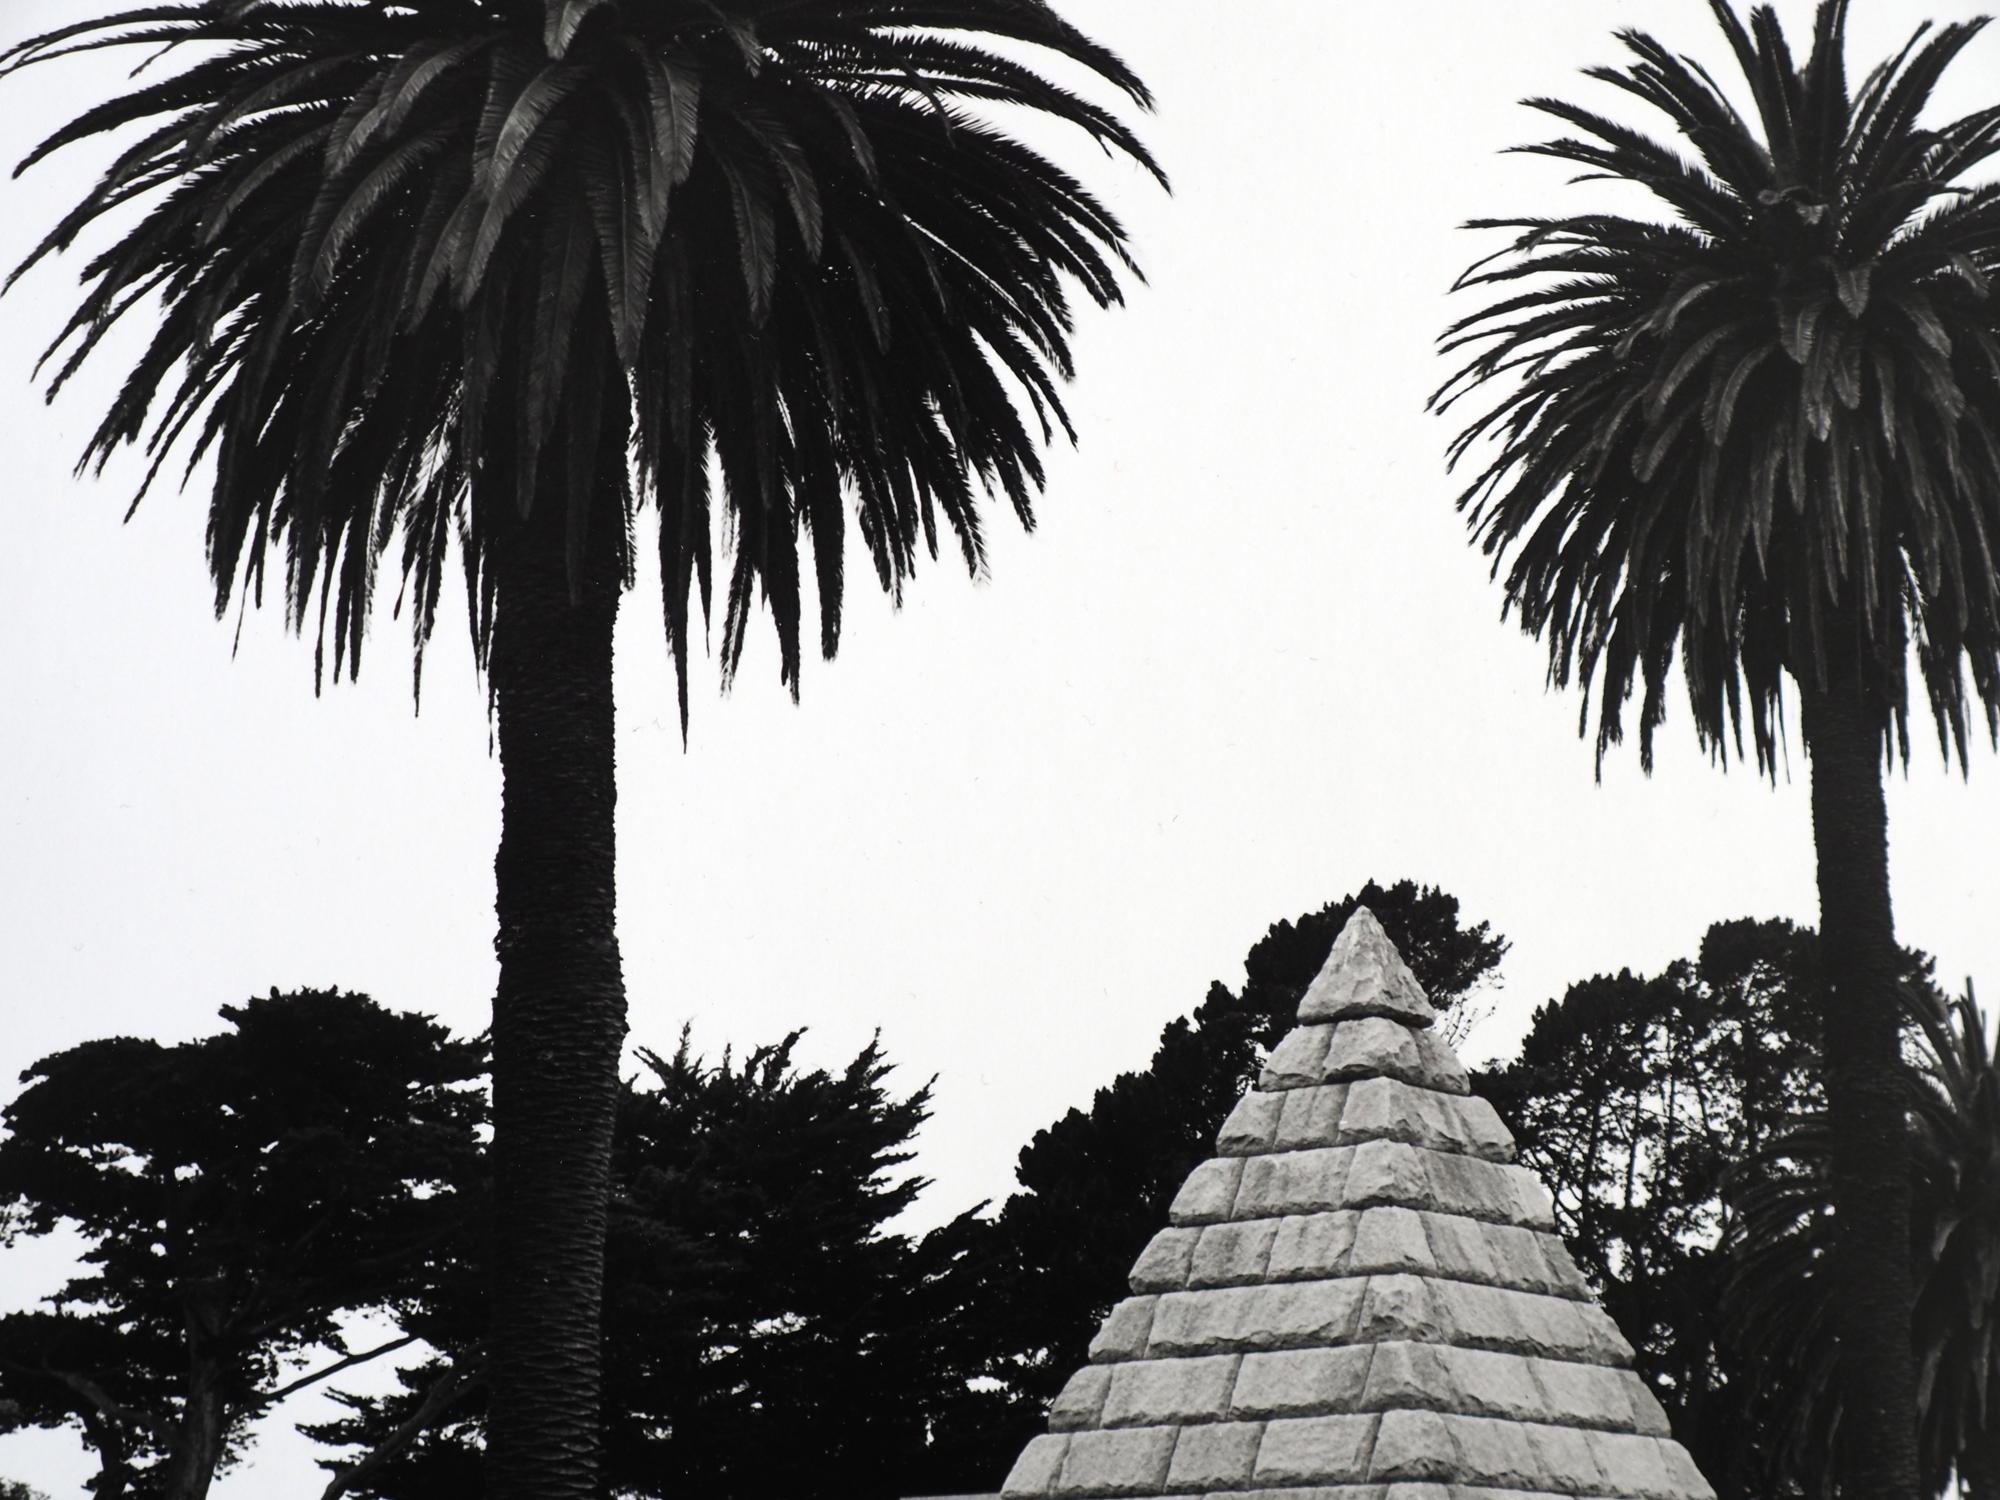 Pyramid & Palms: black & white framed photograph, monument in landscape w/ trees - Photograph by Jenny Lynn